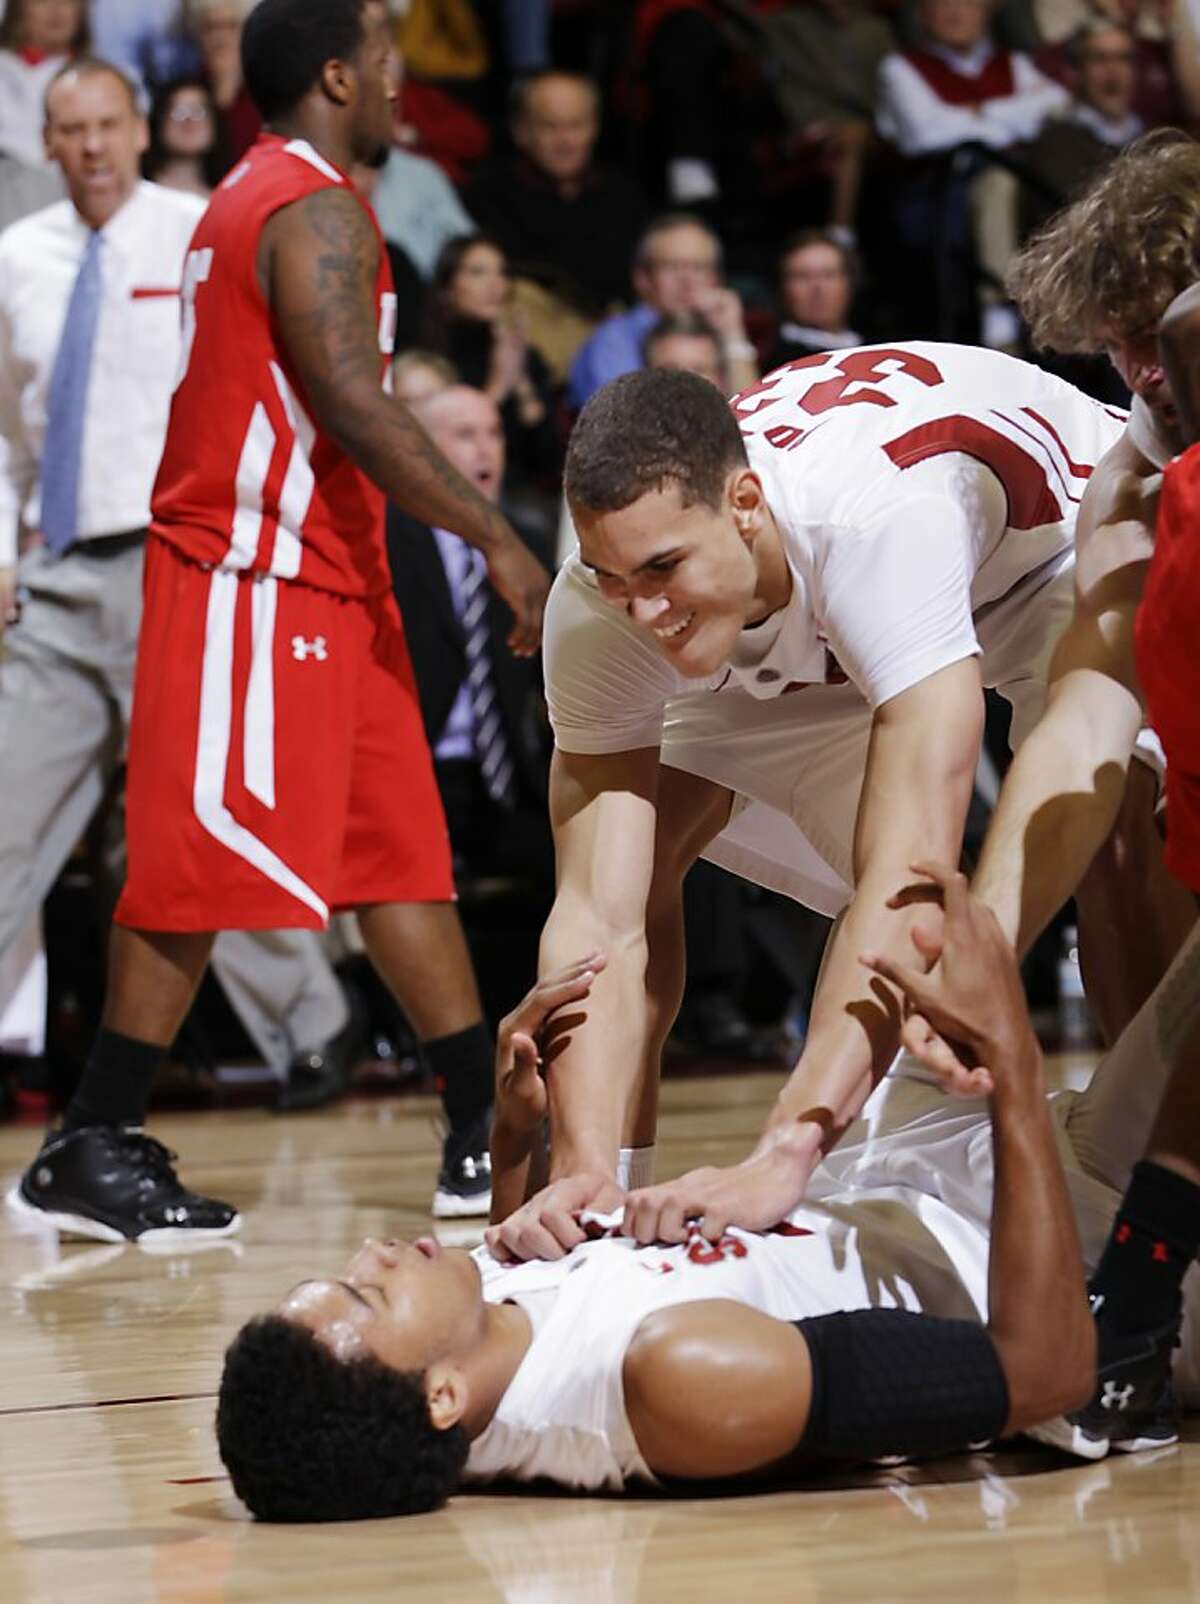 Stanford forward Josh Huestis is congratulated by forward Dwight Powell (33) after Huestis scored against Utah in the second half of an NCAA college basketball game in Stanford, Calif., Thursday, Jan. 12, 2012. Stanford defeated Utah 68-65. Huestis was Stanford's high scorer with 13 points. (AP Photo/Paul Sakuma)